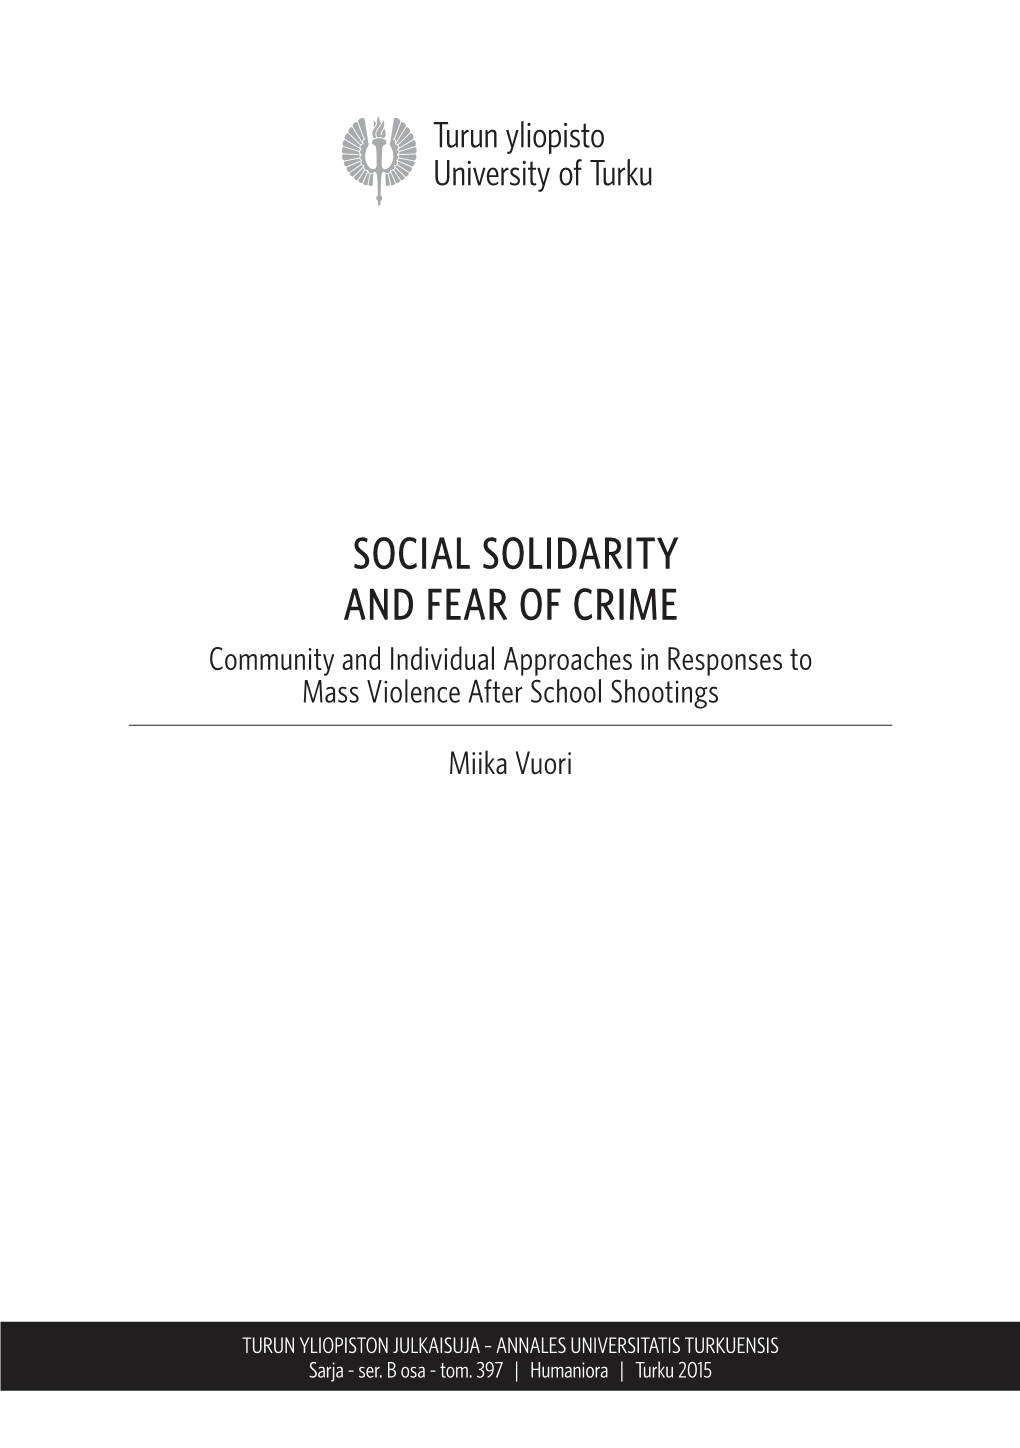 SOCIAL SOLIDARITY and FEAR of CRIME Community and Individual Approaches in Responses to Mass Violence After School Shootings